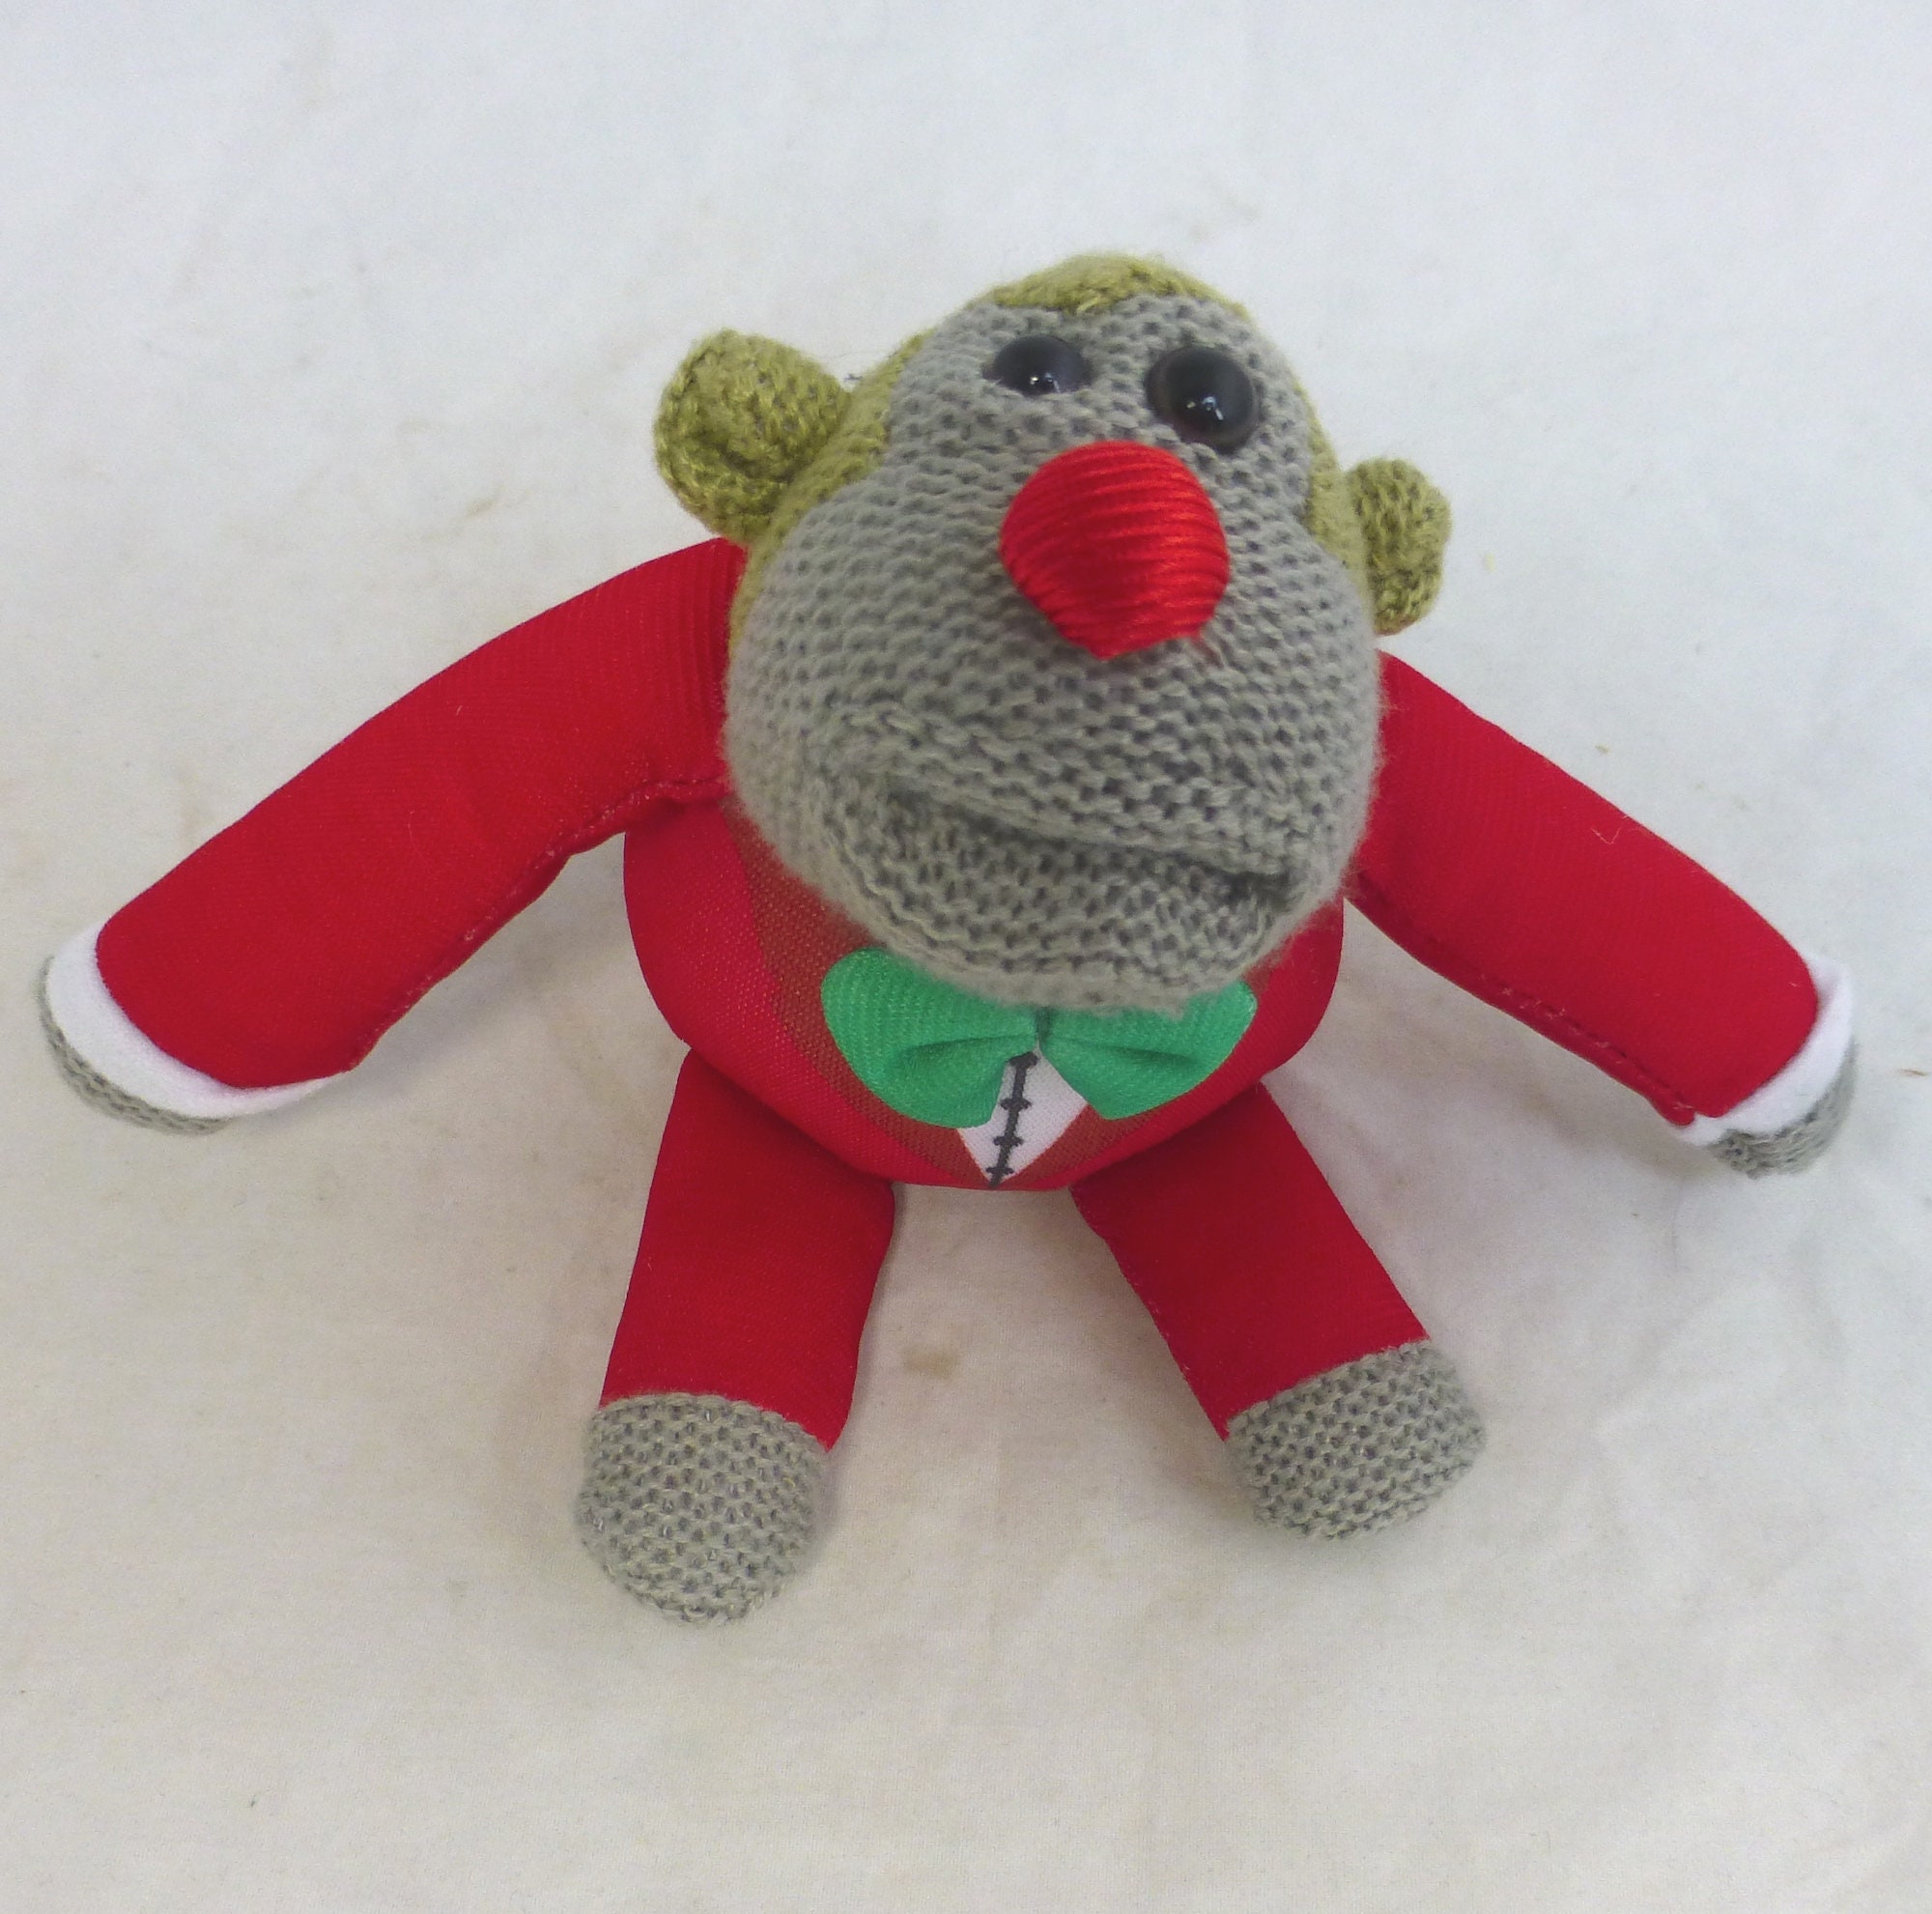 PG Tips Tea Chimp Promotional Knitted Monkey Beanie Plush Toy Most Famous  Monkey 6 in L Super Cute Soft Toy Gift for Chimp Monkey Lover -  Israel